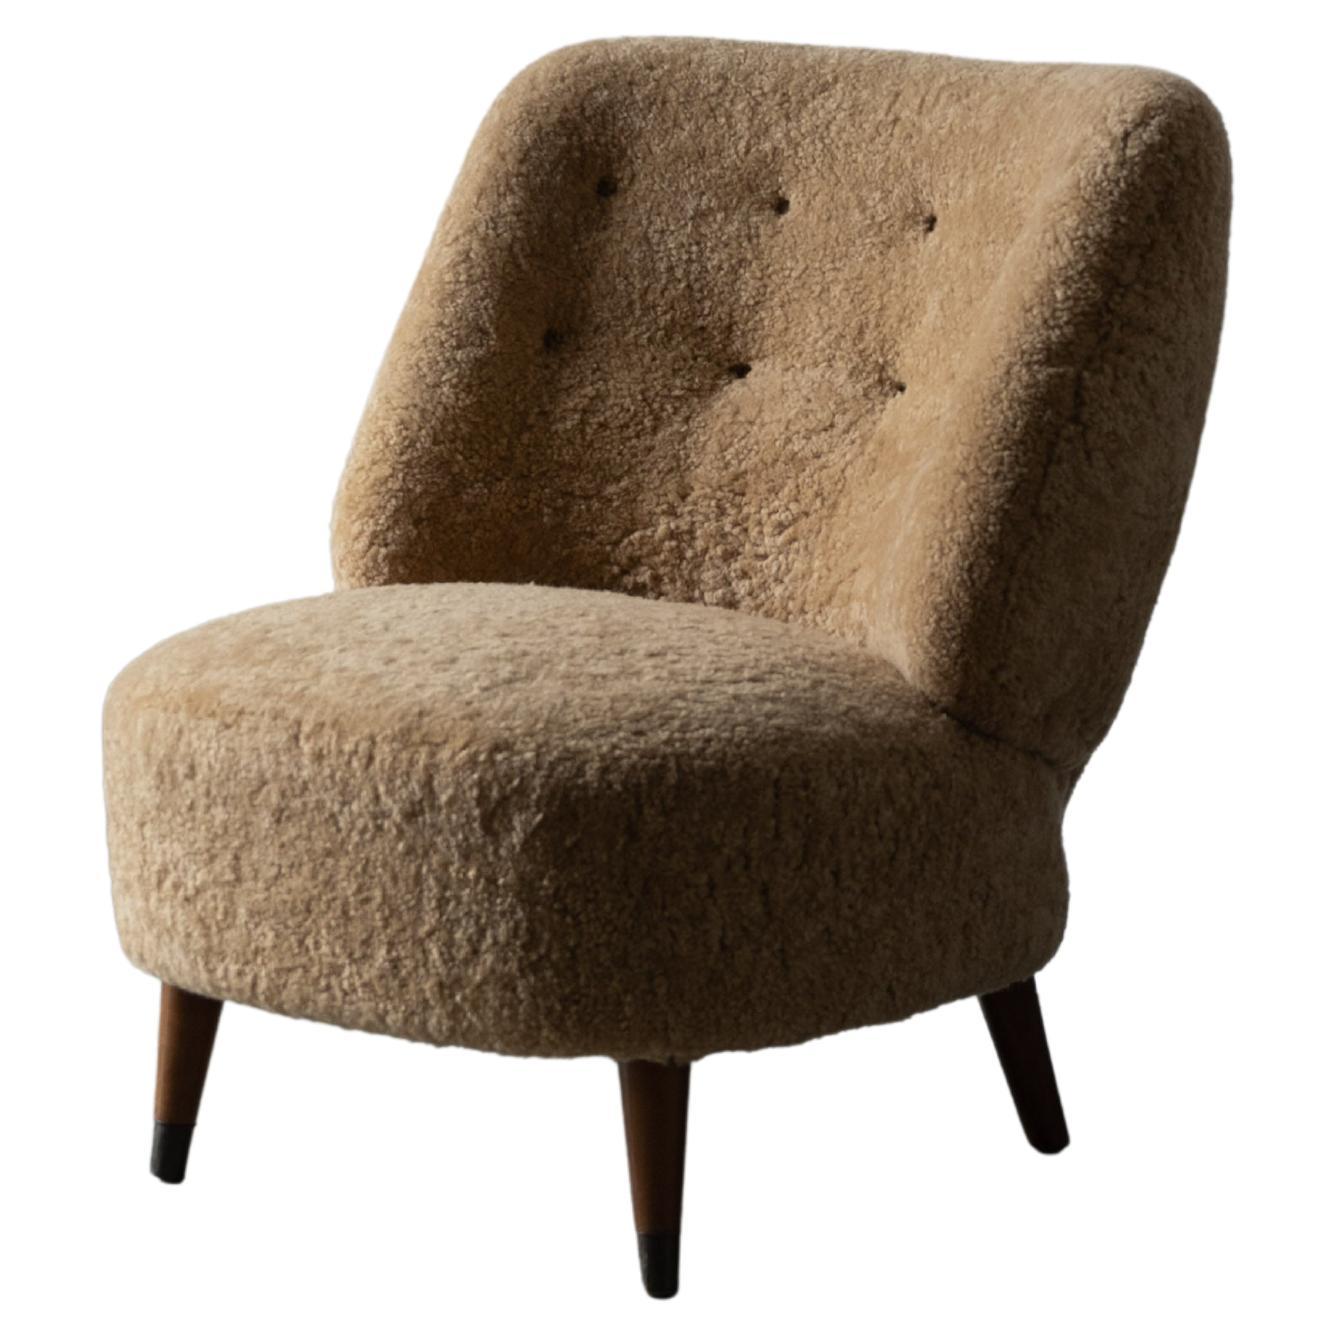 Sven Staaf, Lounge Chair, Beige Shearling, Wood, Sweden, 1940s